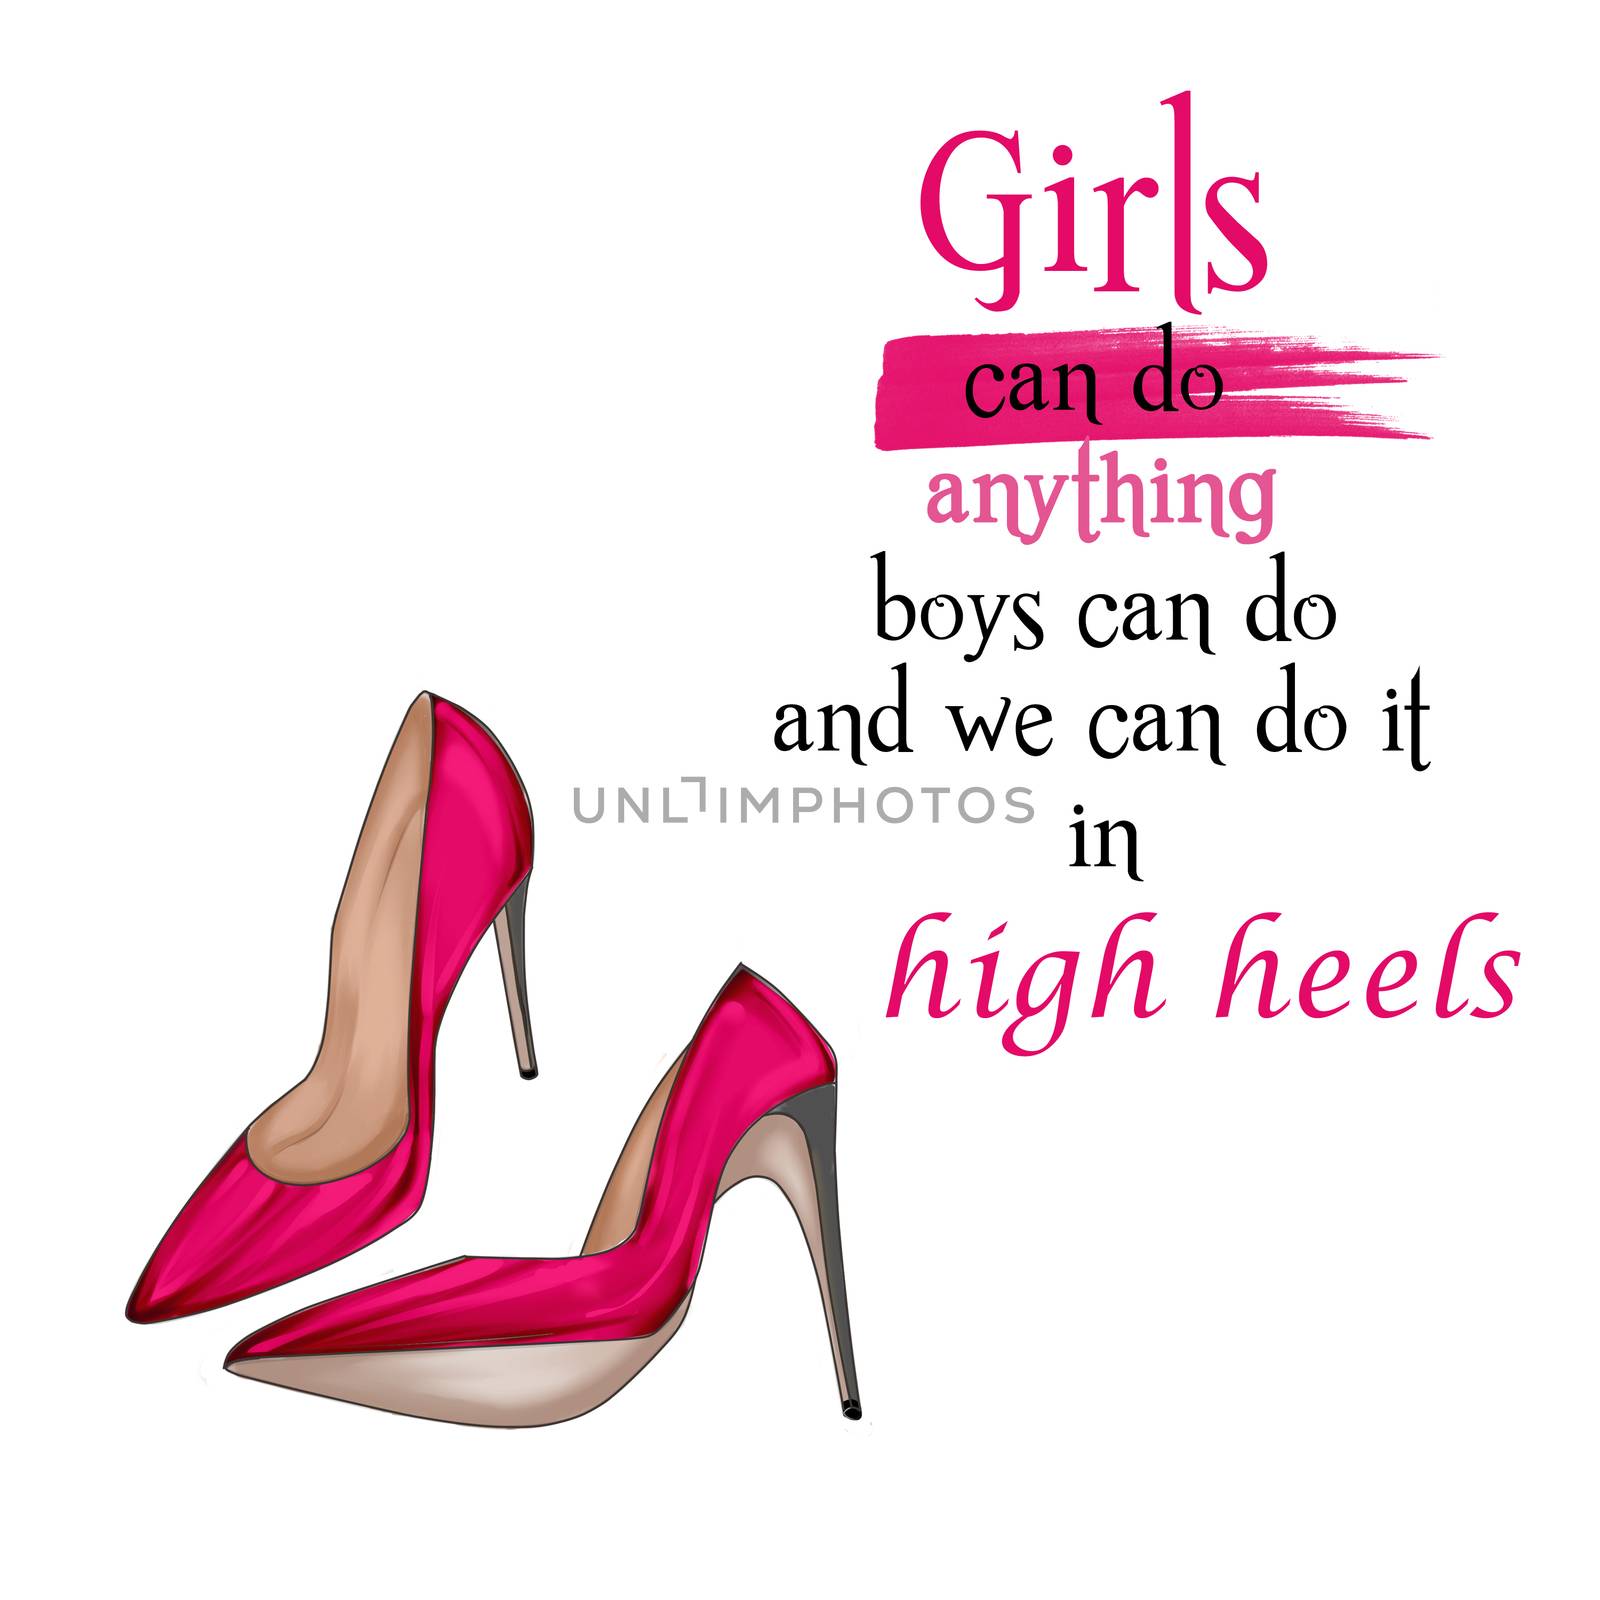 Fashion Illustration - Funny Quotation on White background and stiletto shoes by GGillustrations